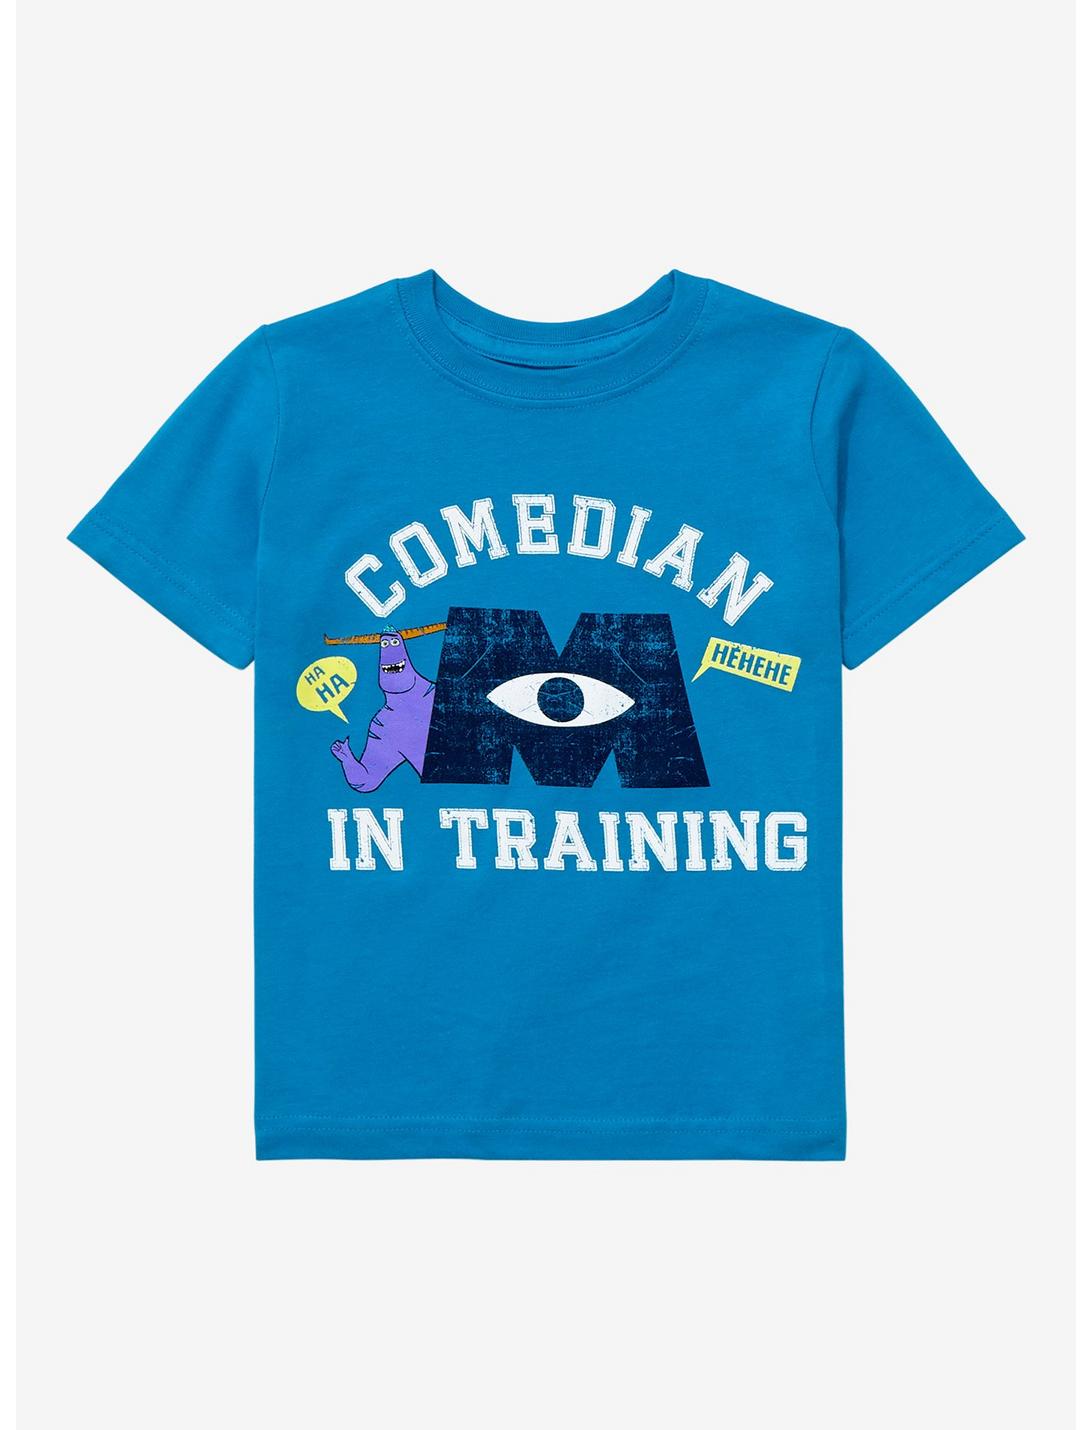 Disney Pixar Monsters at Work Comedian in Training Toddler T-Shirt - BoxLunch Exclusive, LIGHT BLUE, hi-res